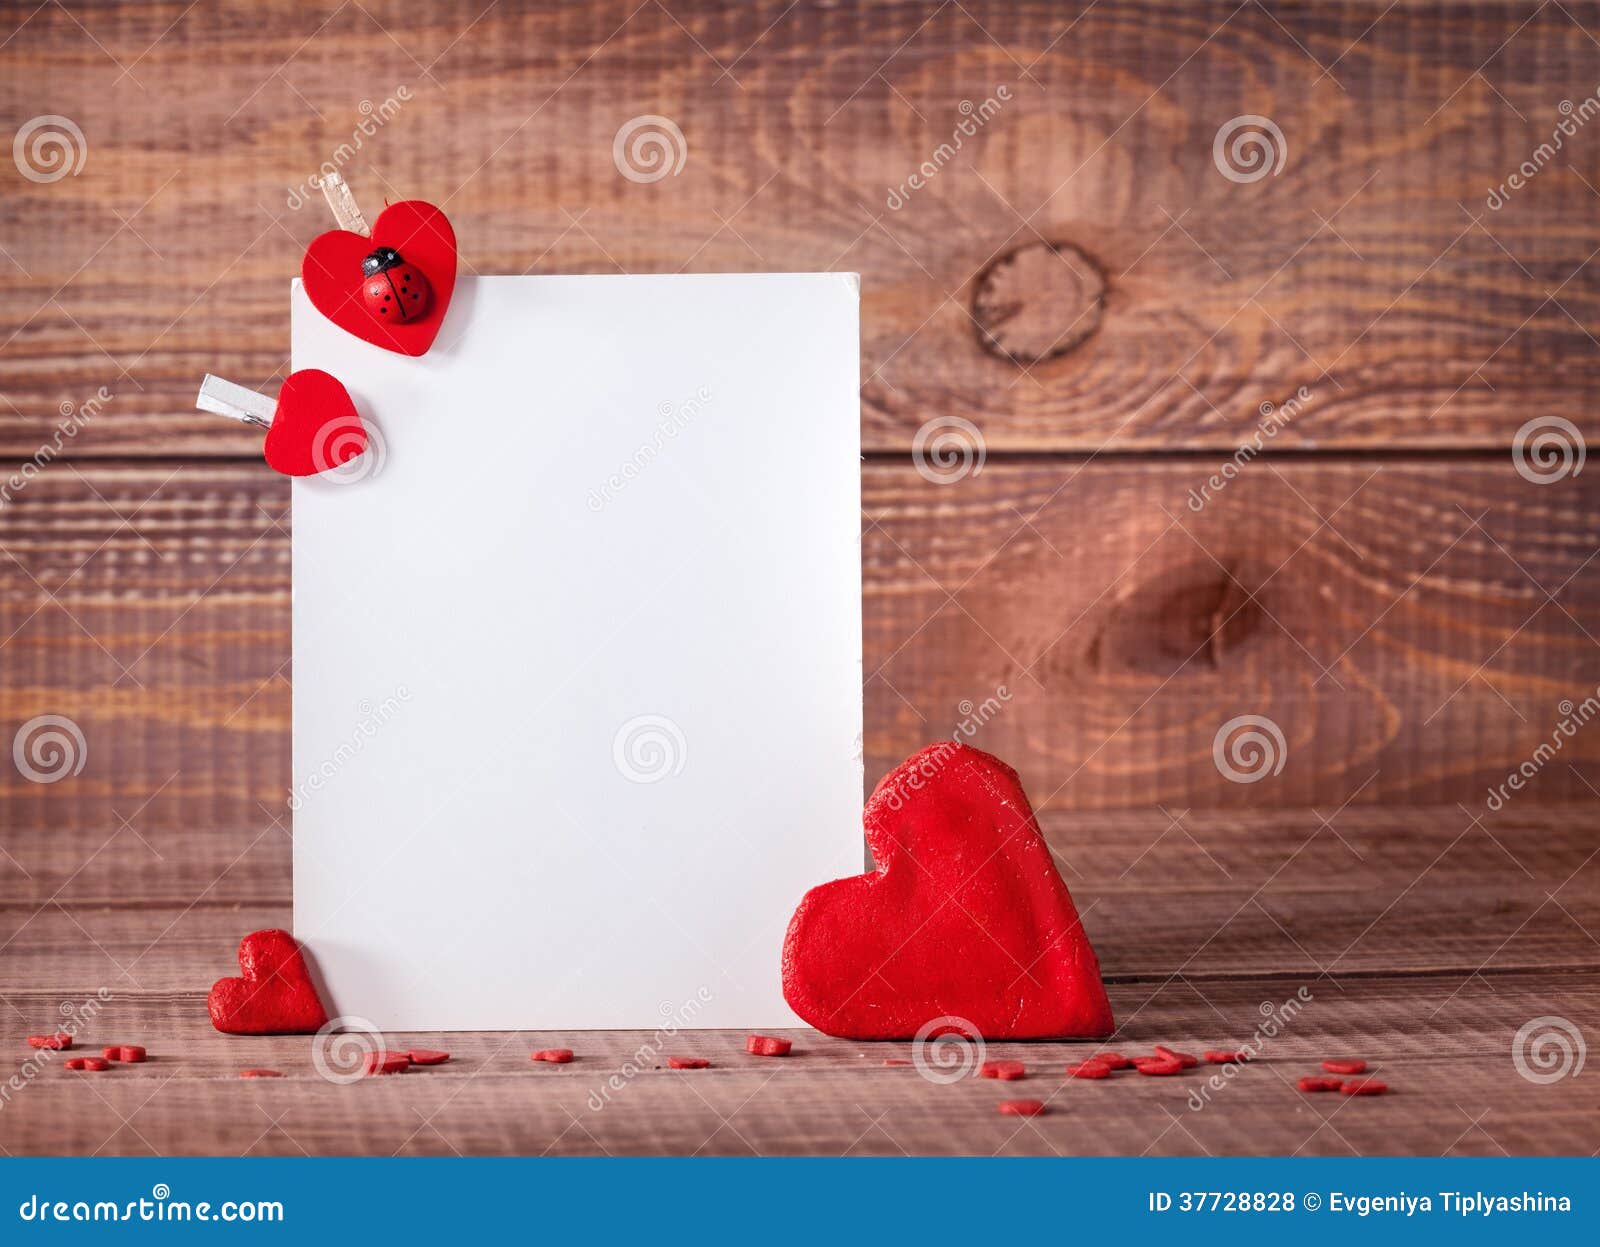 Card with hearts stock photo. Image of picture, paper - 37728828